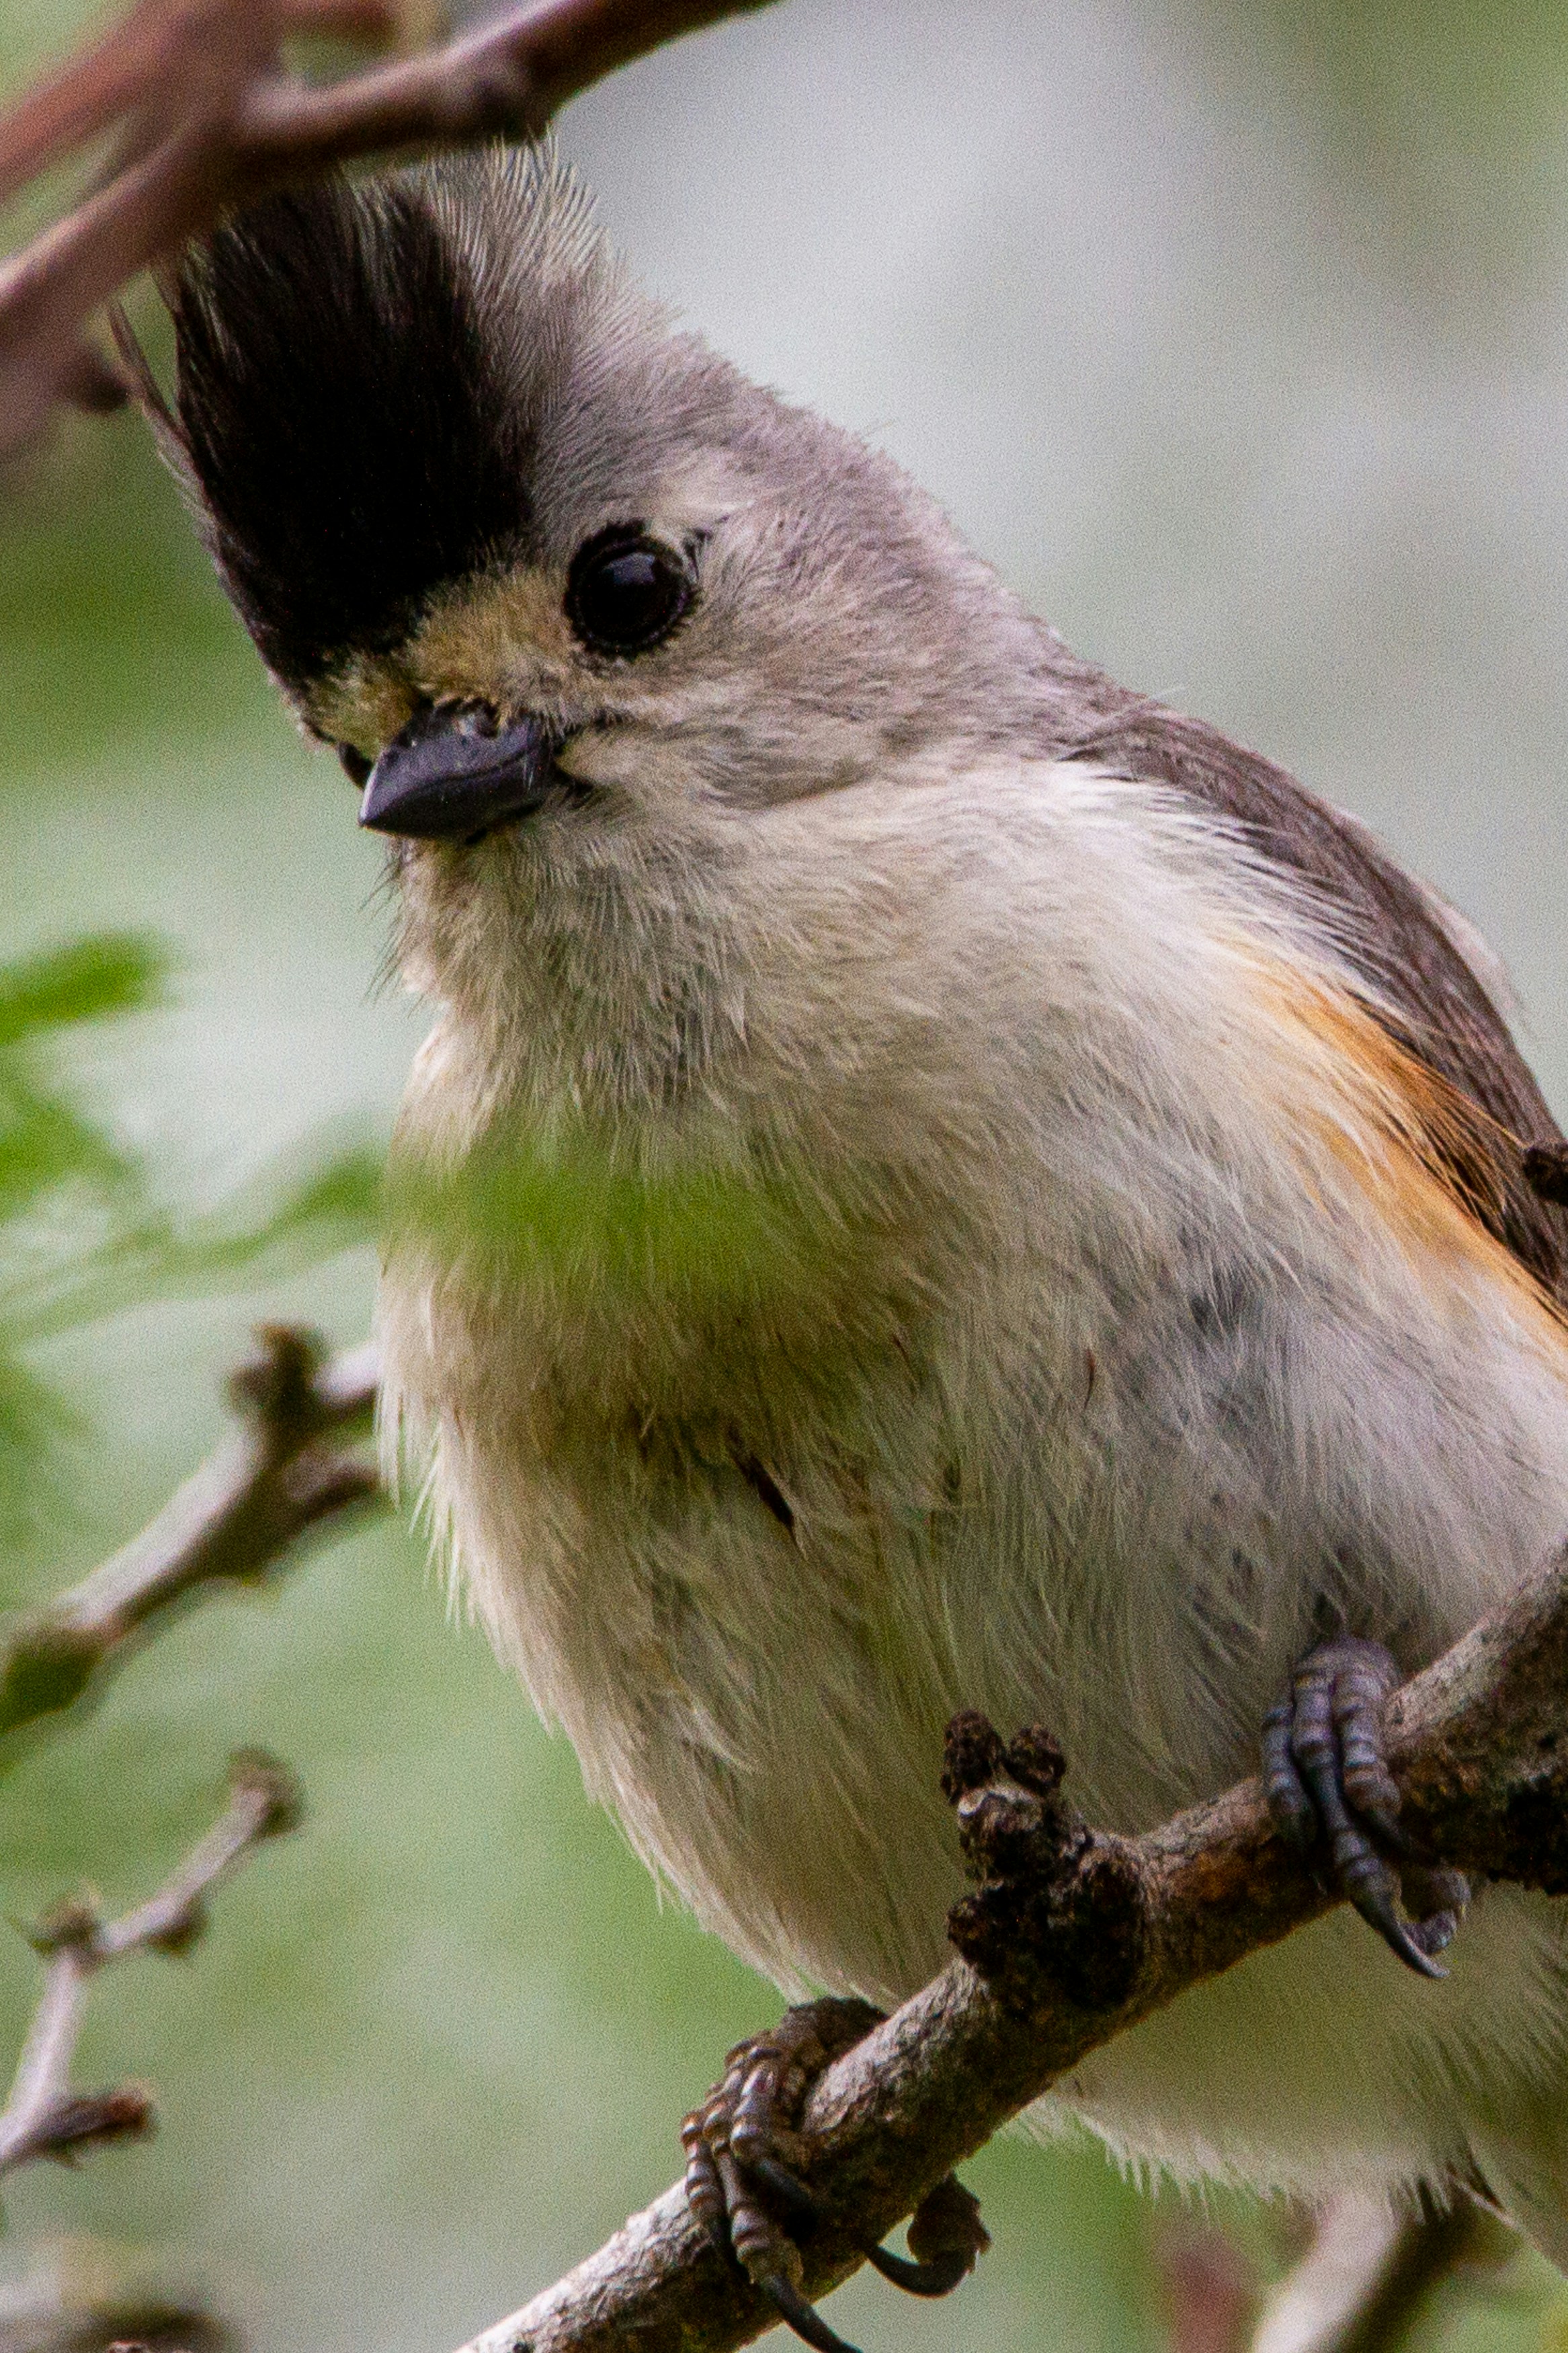 A black-crested titmouse perched on a branch.